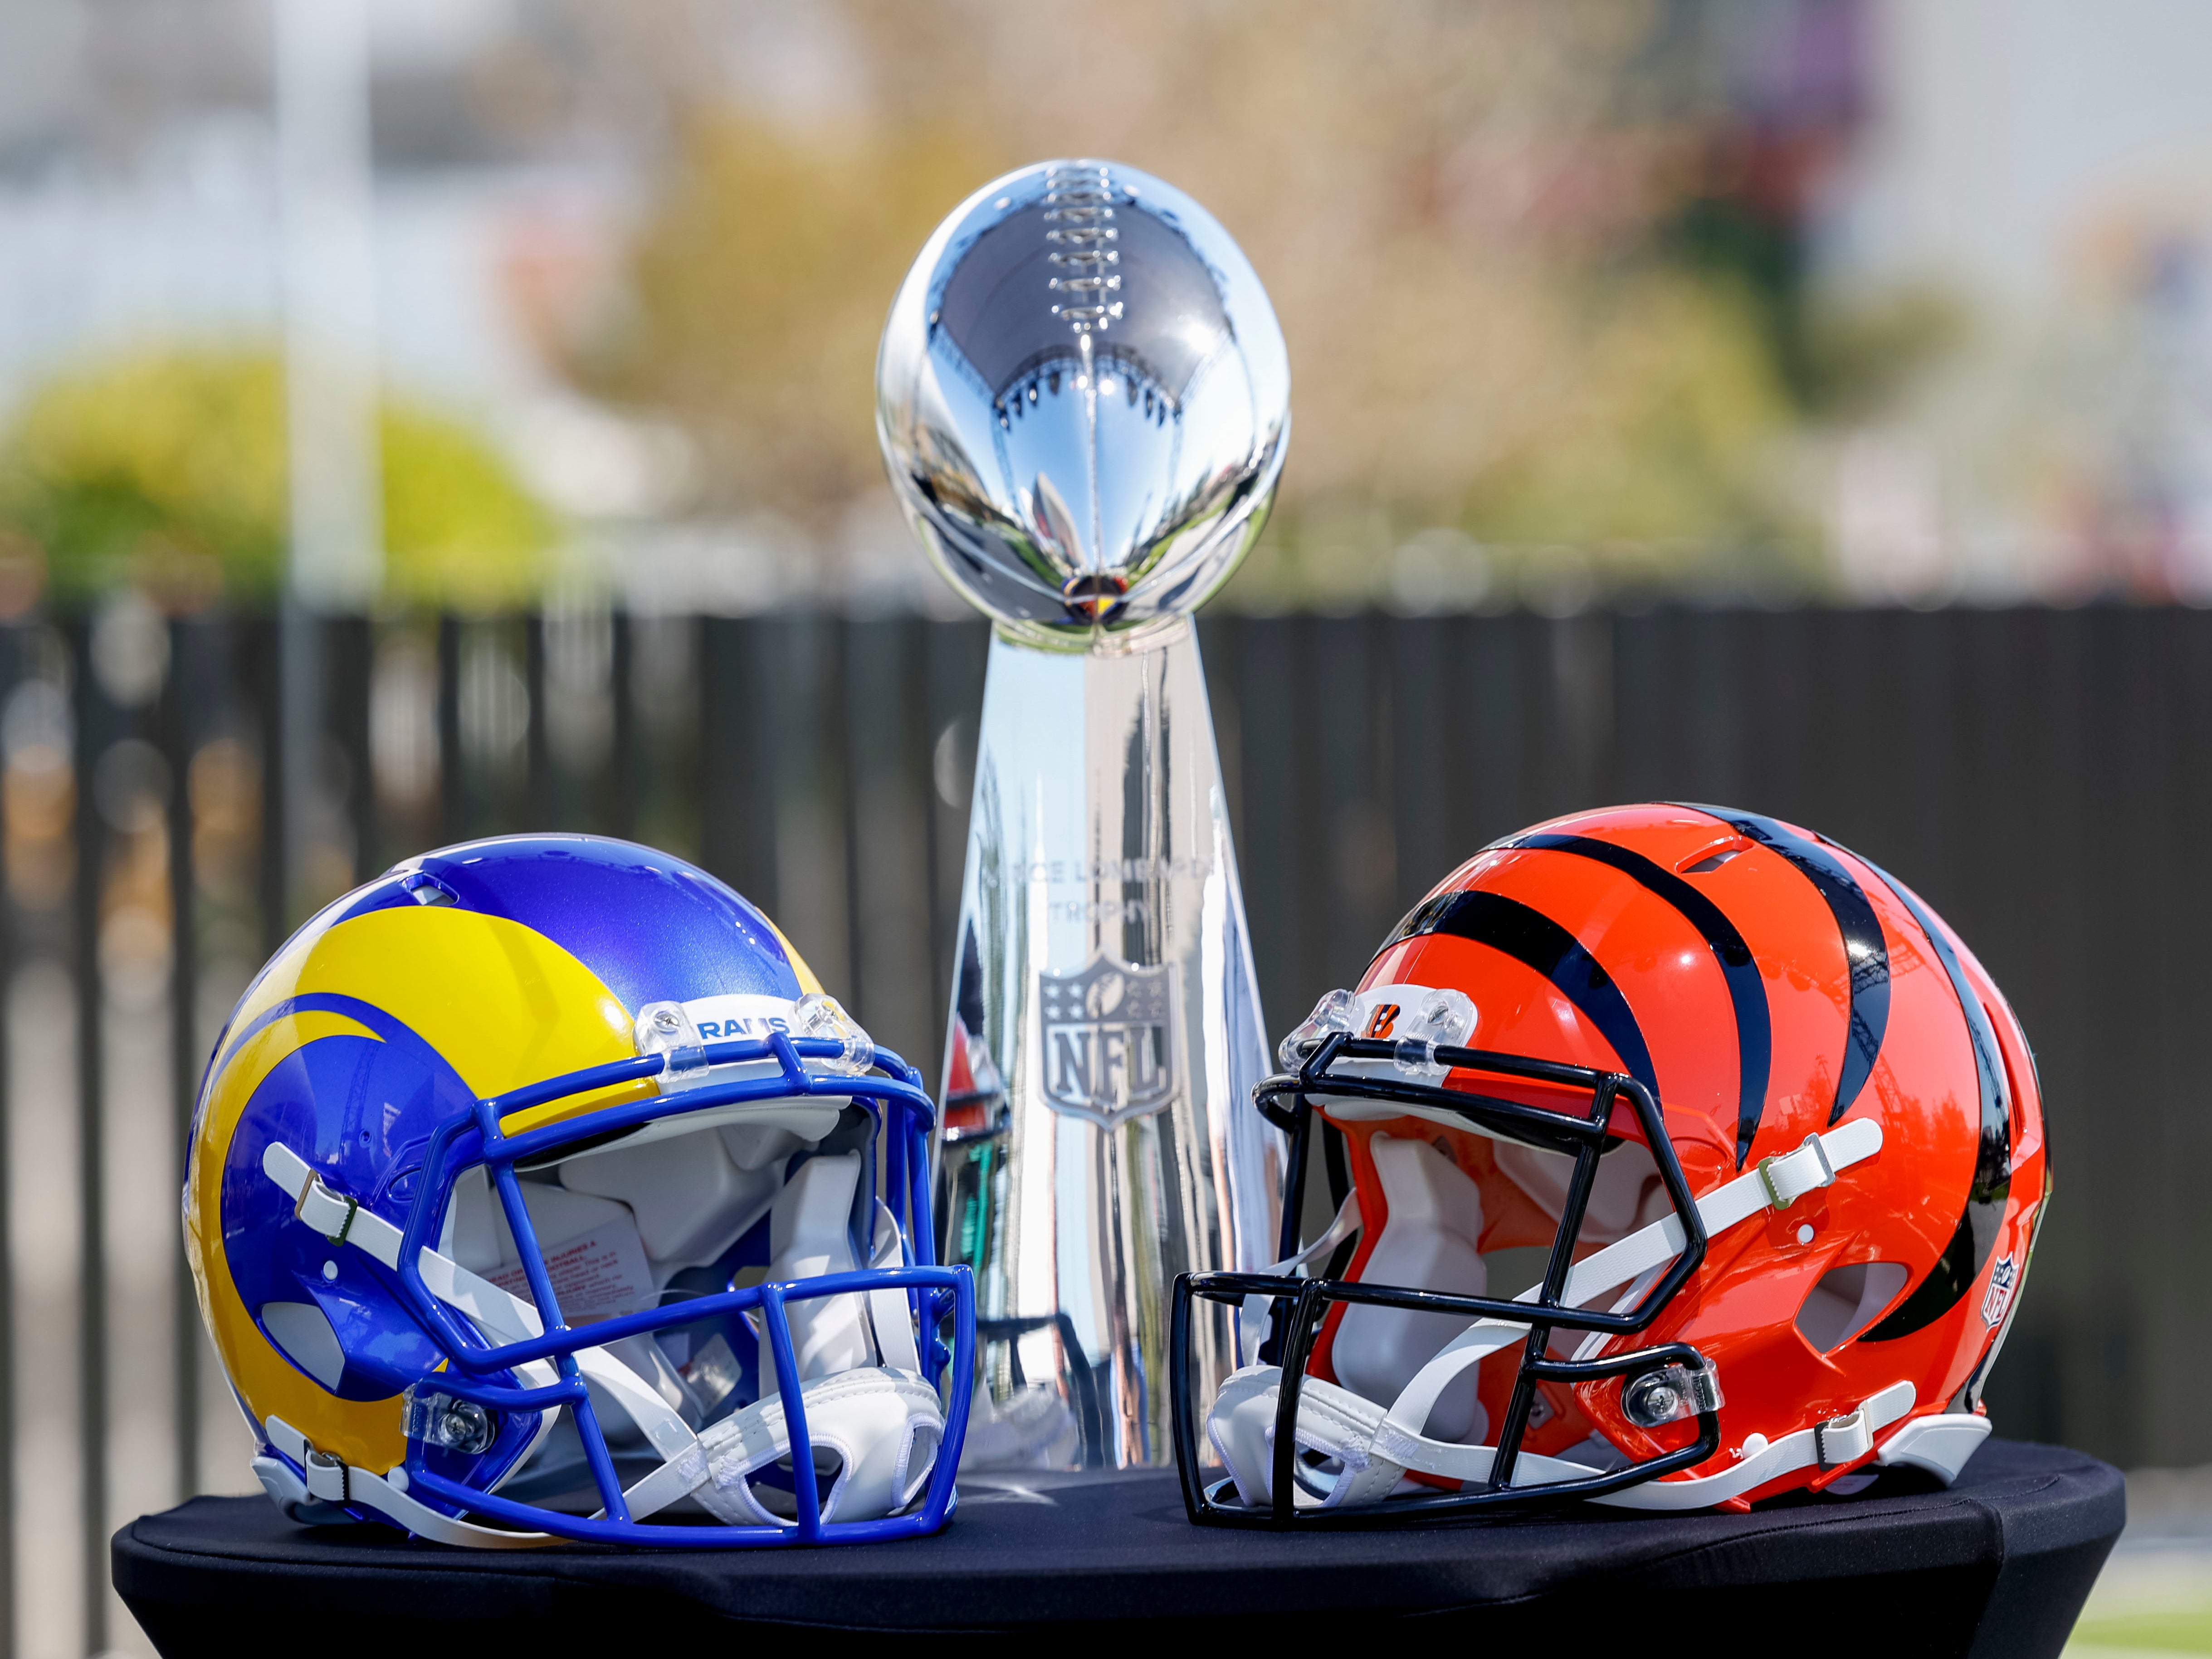 The Los Angeles Rams’ and the Cincinnati Bengals’ helmets sit in front of the Vince Lombardi Trophy